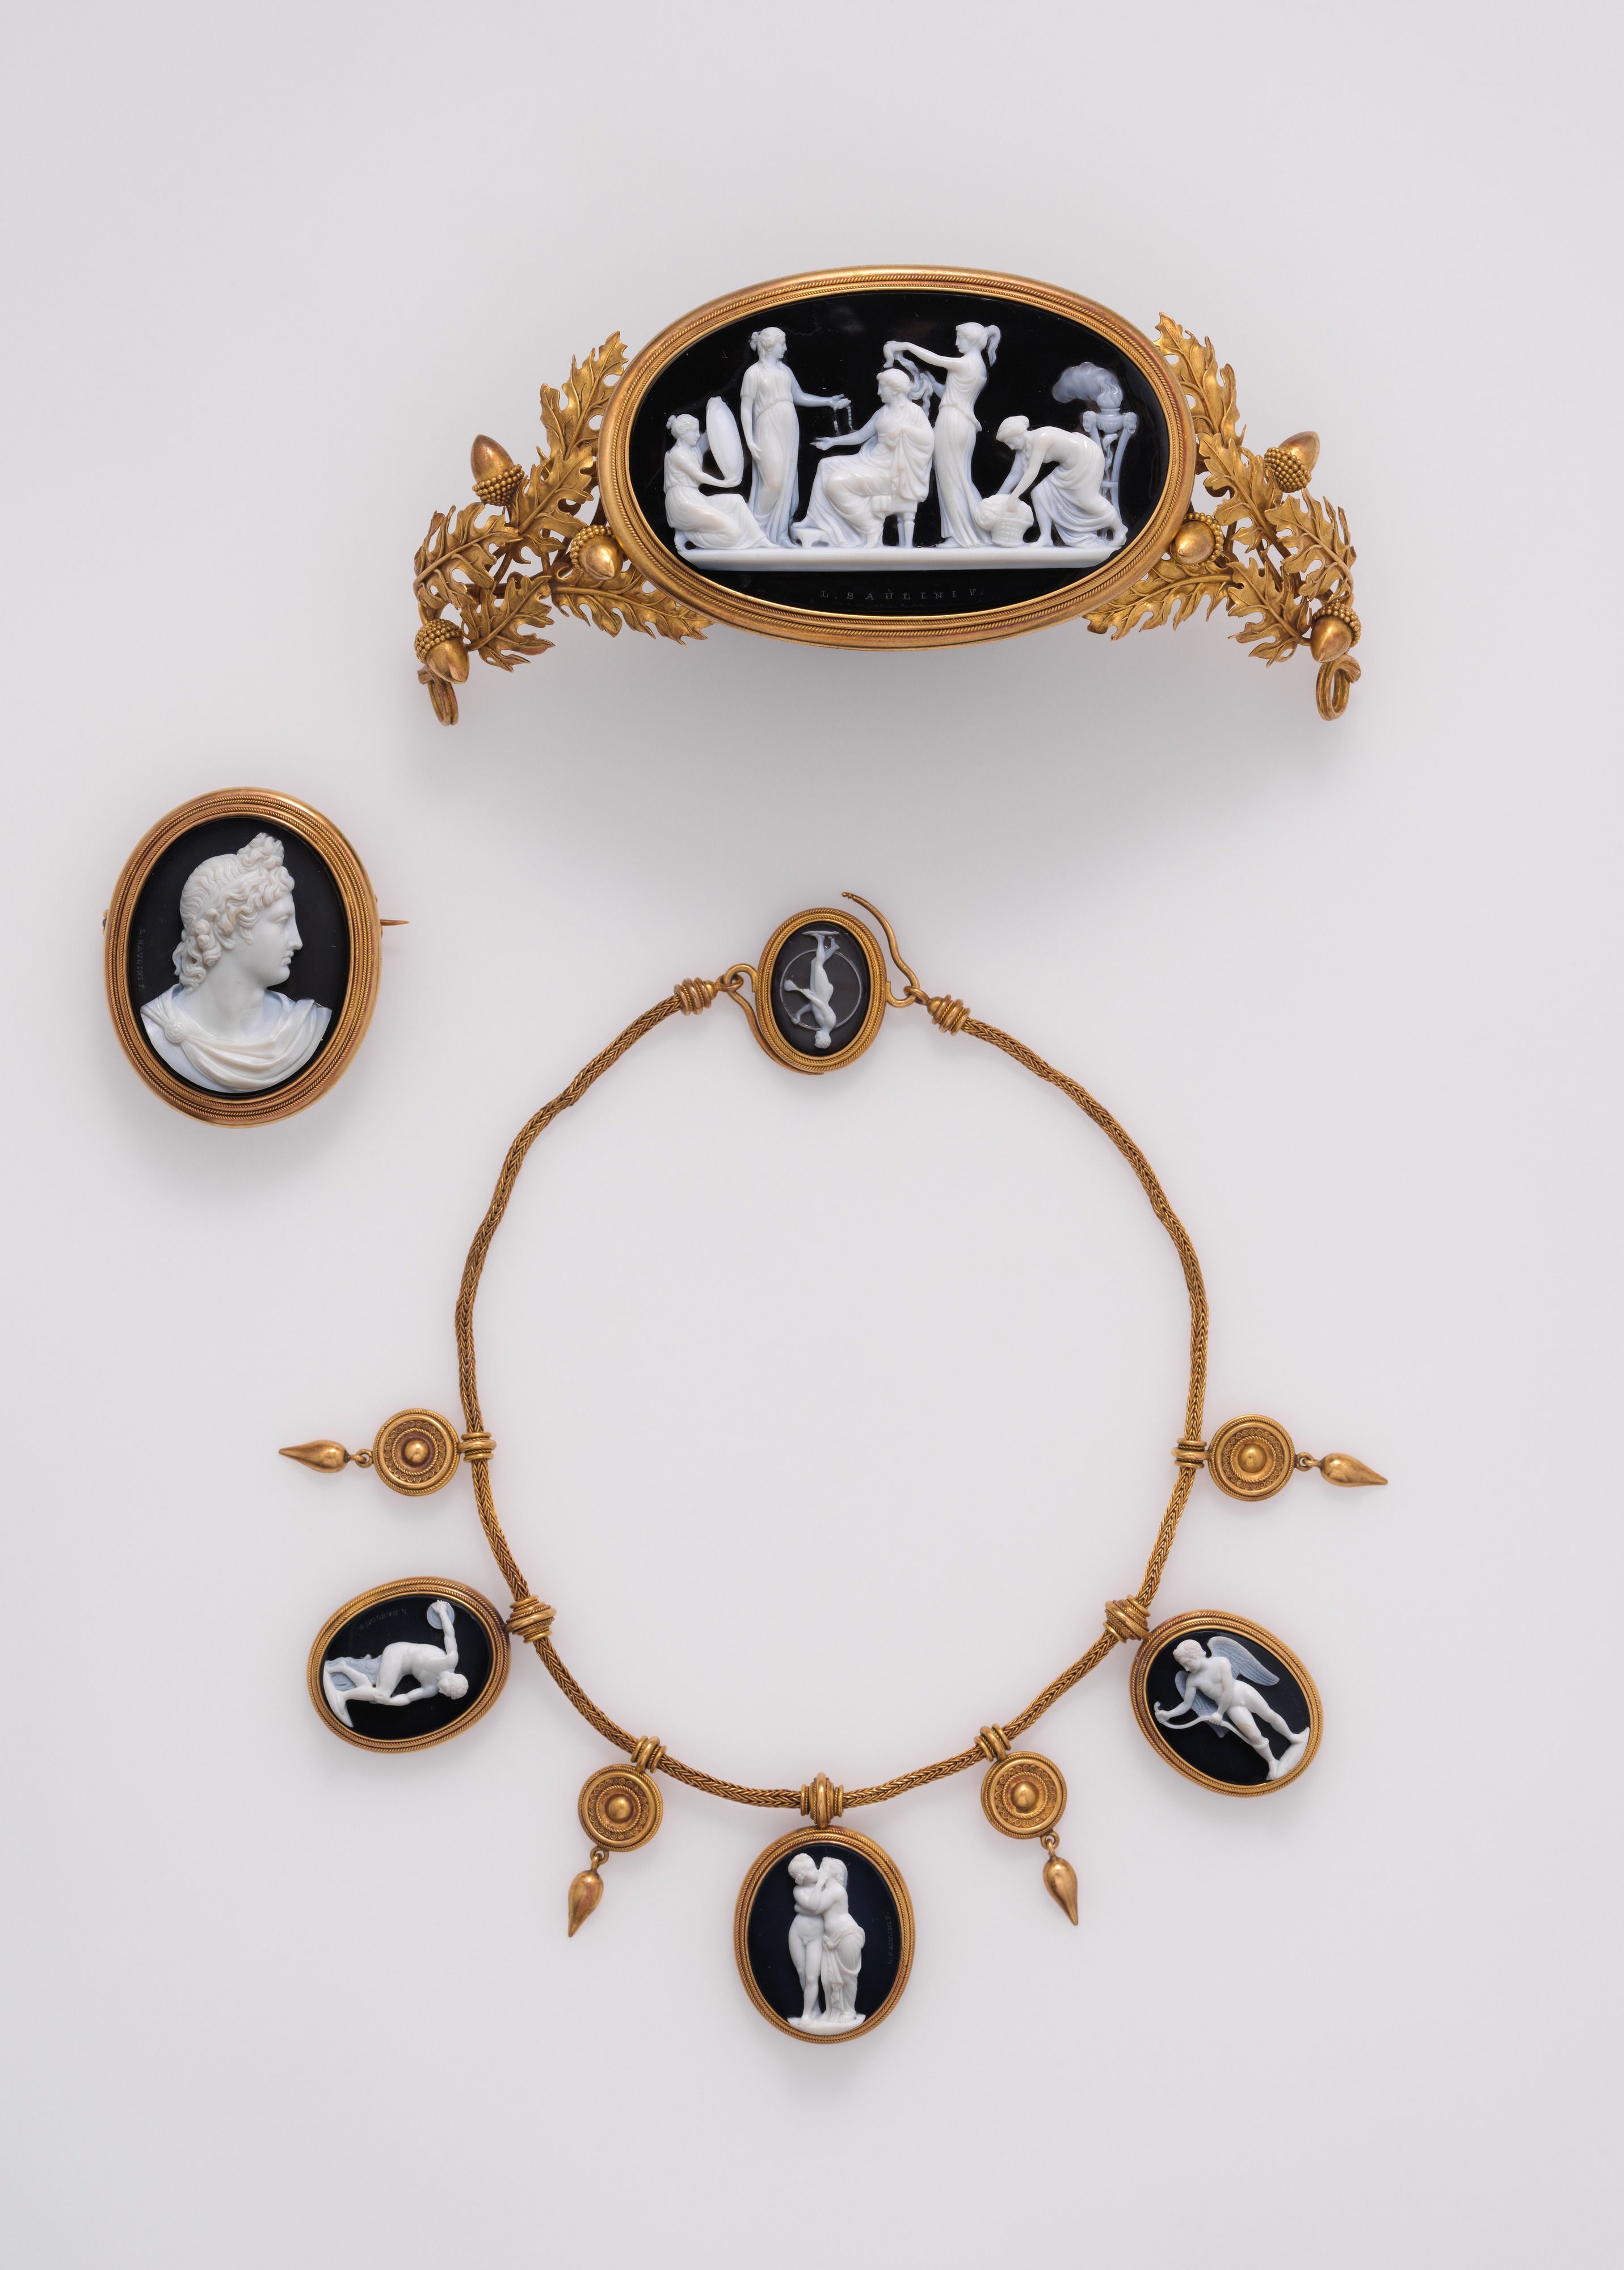 Cameo parure: tiara, necklace and brooch. Carved by Luigi Saulini. In the collection of the Metropolitan Museum of Art.